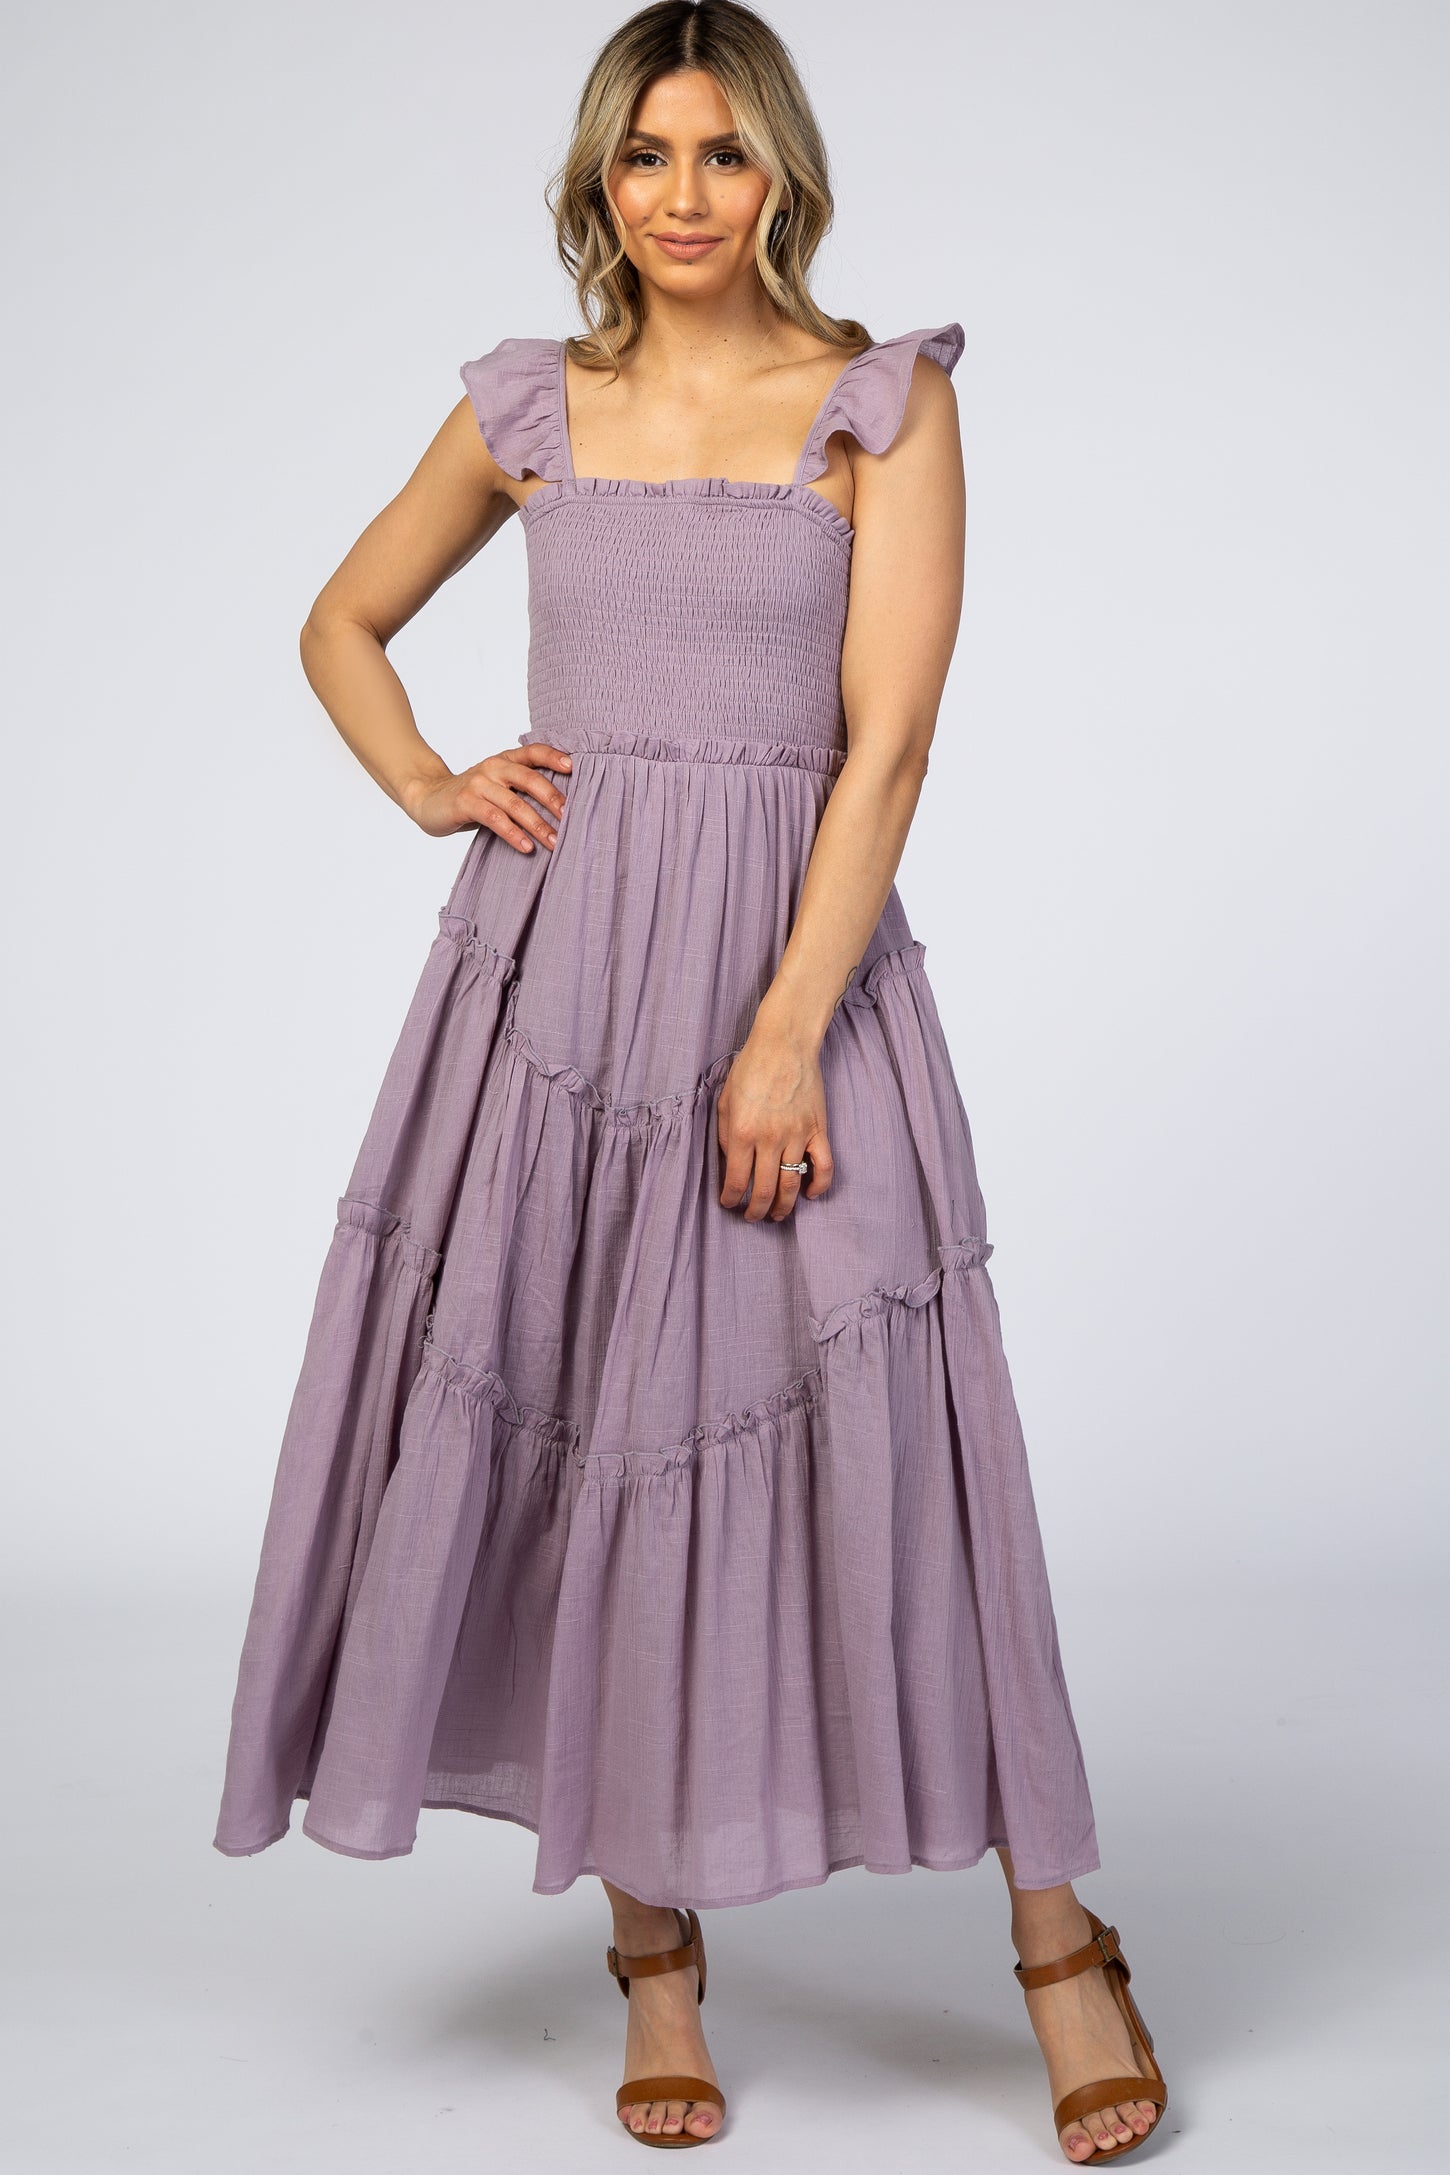 Lavender Smocked Ruffle Accent Maternity Dress